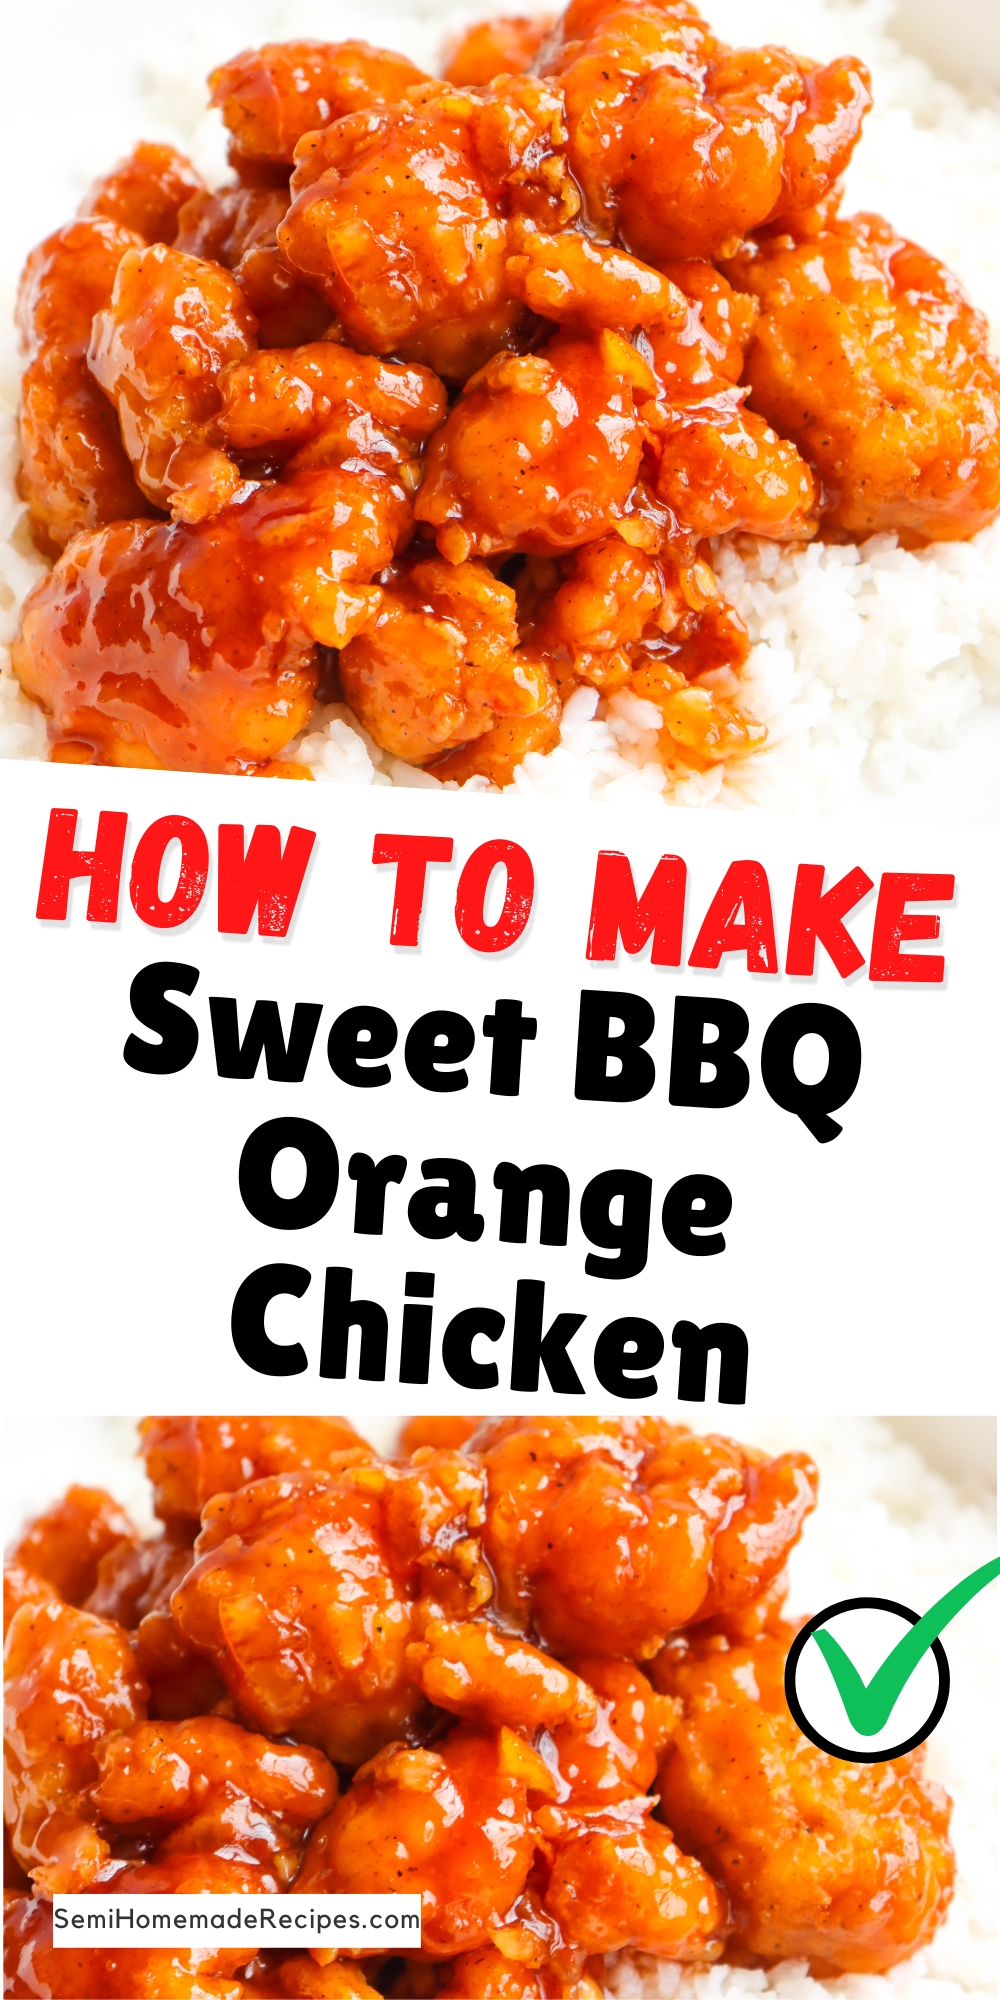 Are you a fan of sweet and savory dishes? Look no further! In this article, we'll show you how to make a mouthwatering Sweet BBQ Orange Chicken recipe that's sure to satisfy your cravings.